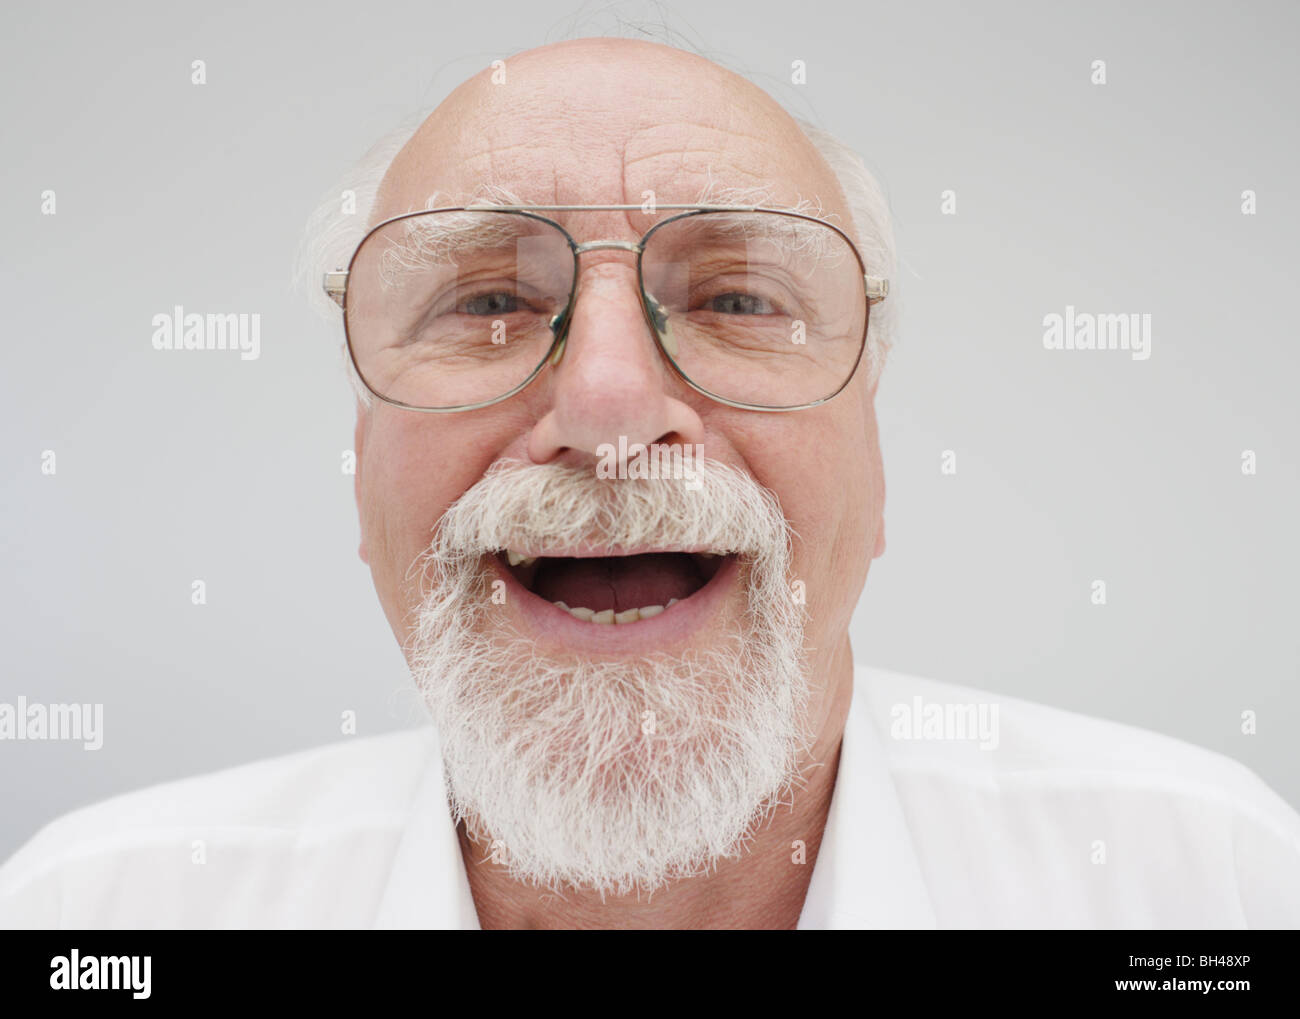 Senior businessman wearing a shirt ( age 60 to 75 years ), laughing Stock Photo